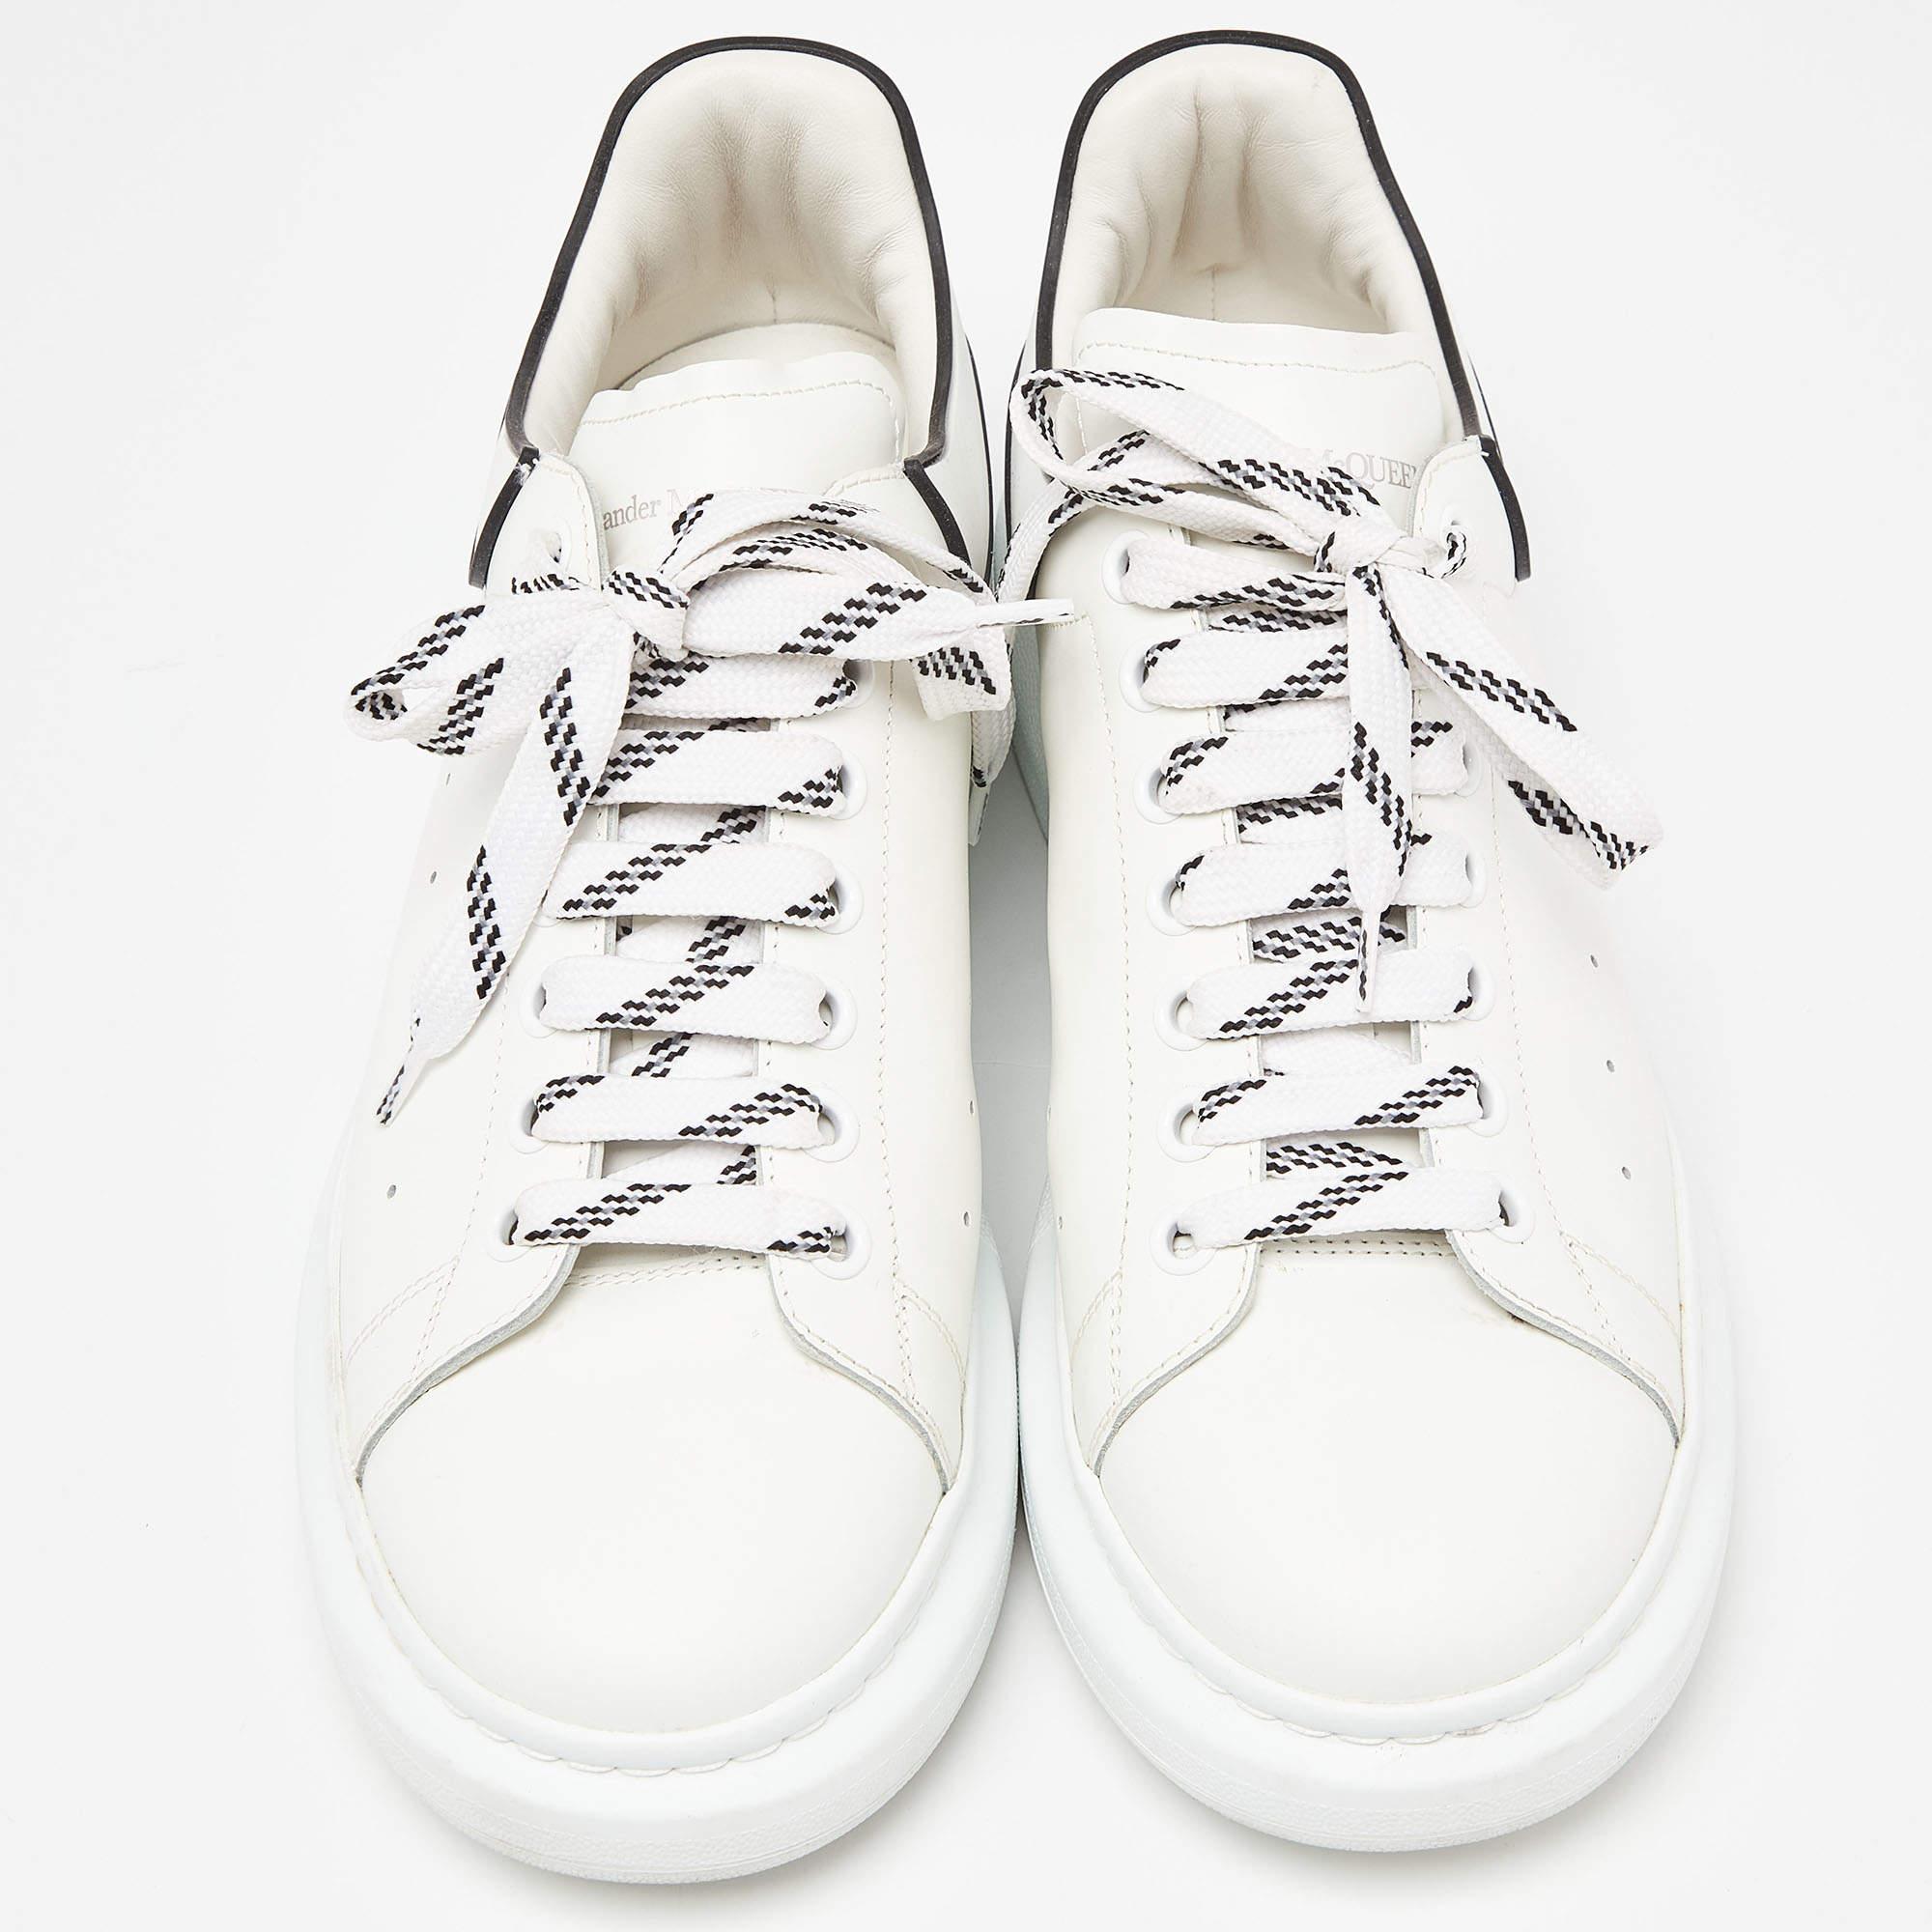 Coming in a classic silhouette, these Alexander McQueen sneakers are a seamless combination of luxury, comfort, and style. These sneakers are designed with signature details and comfortable insoles.

Includes: Original Box, Info Booklet

